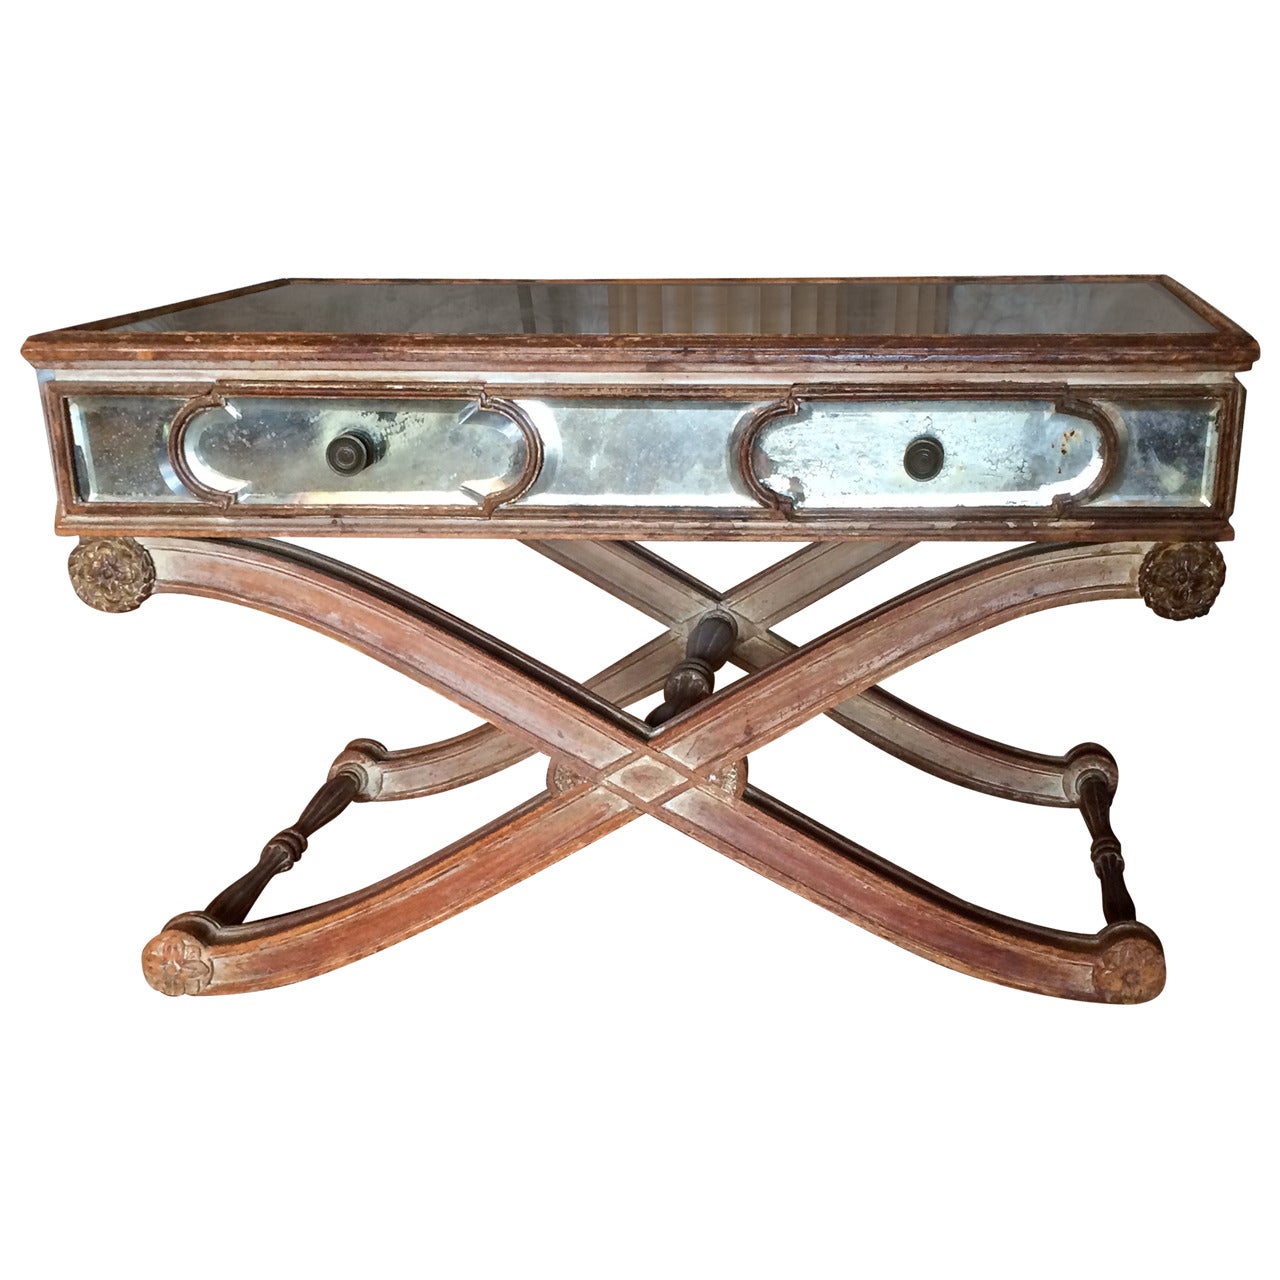 Italian Mid-20th Century Cerused Wood Mirrored Coffee Table with X-form Base